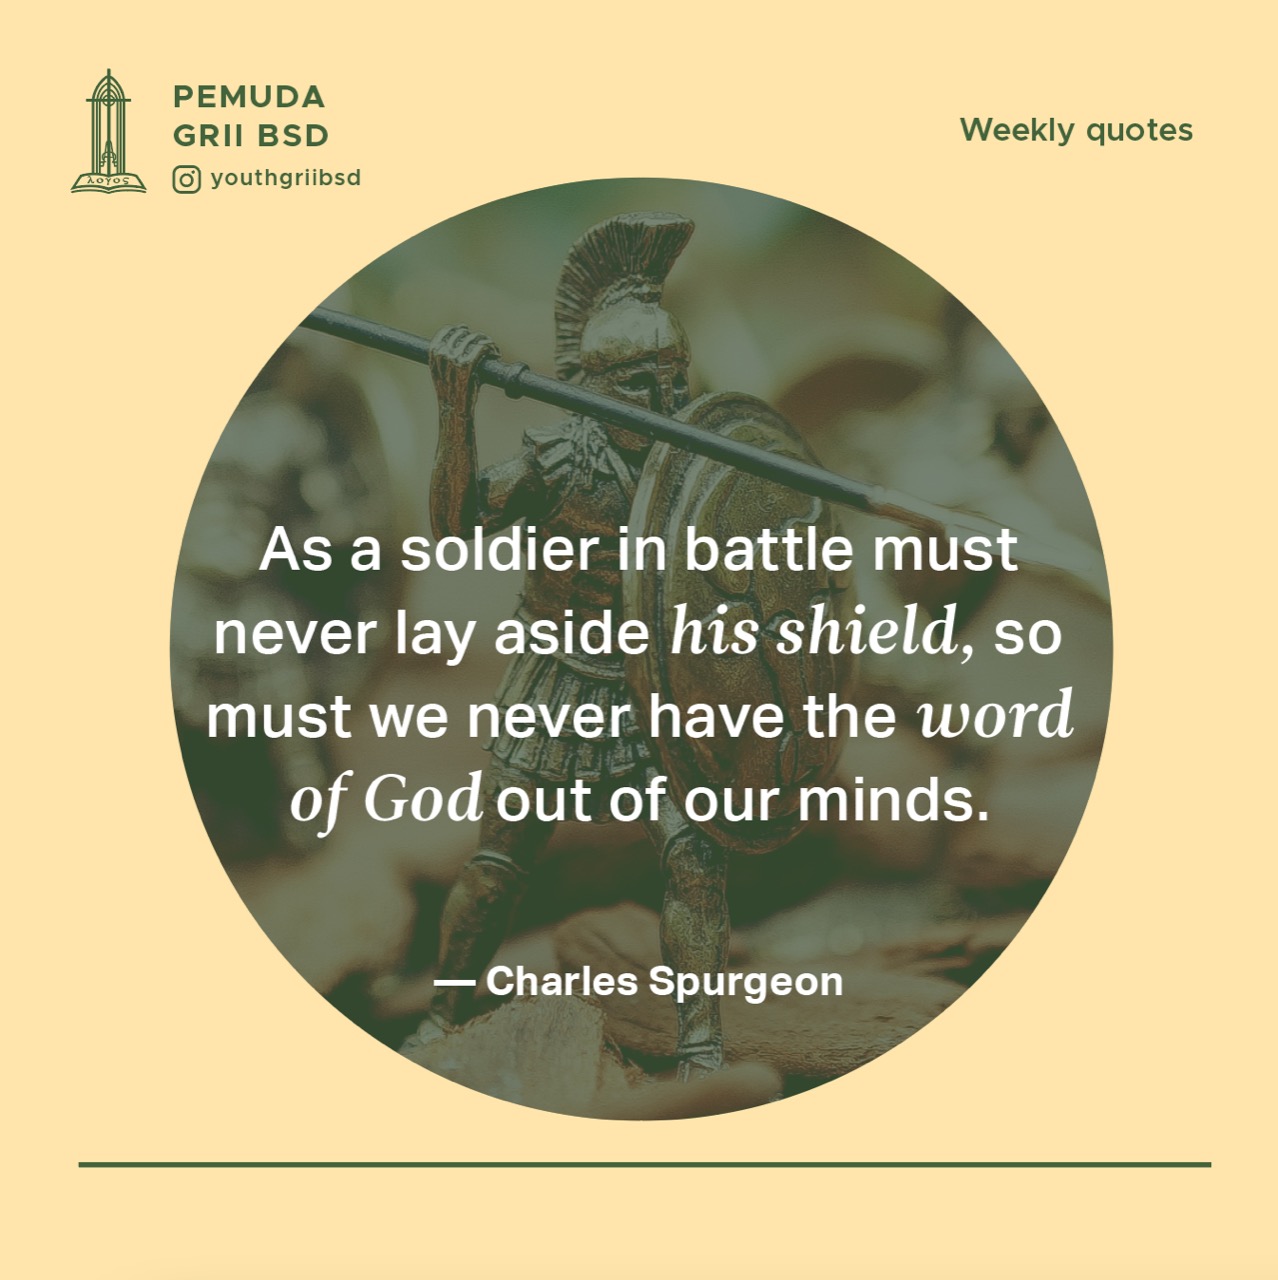 As a soldier in battle must never lay aside his shield, so must we never have the word of God out of our minds